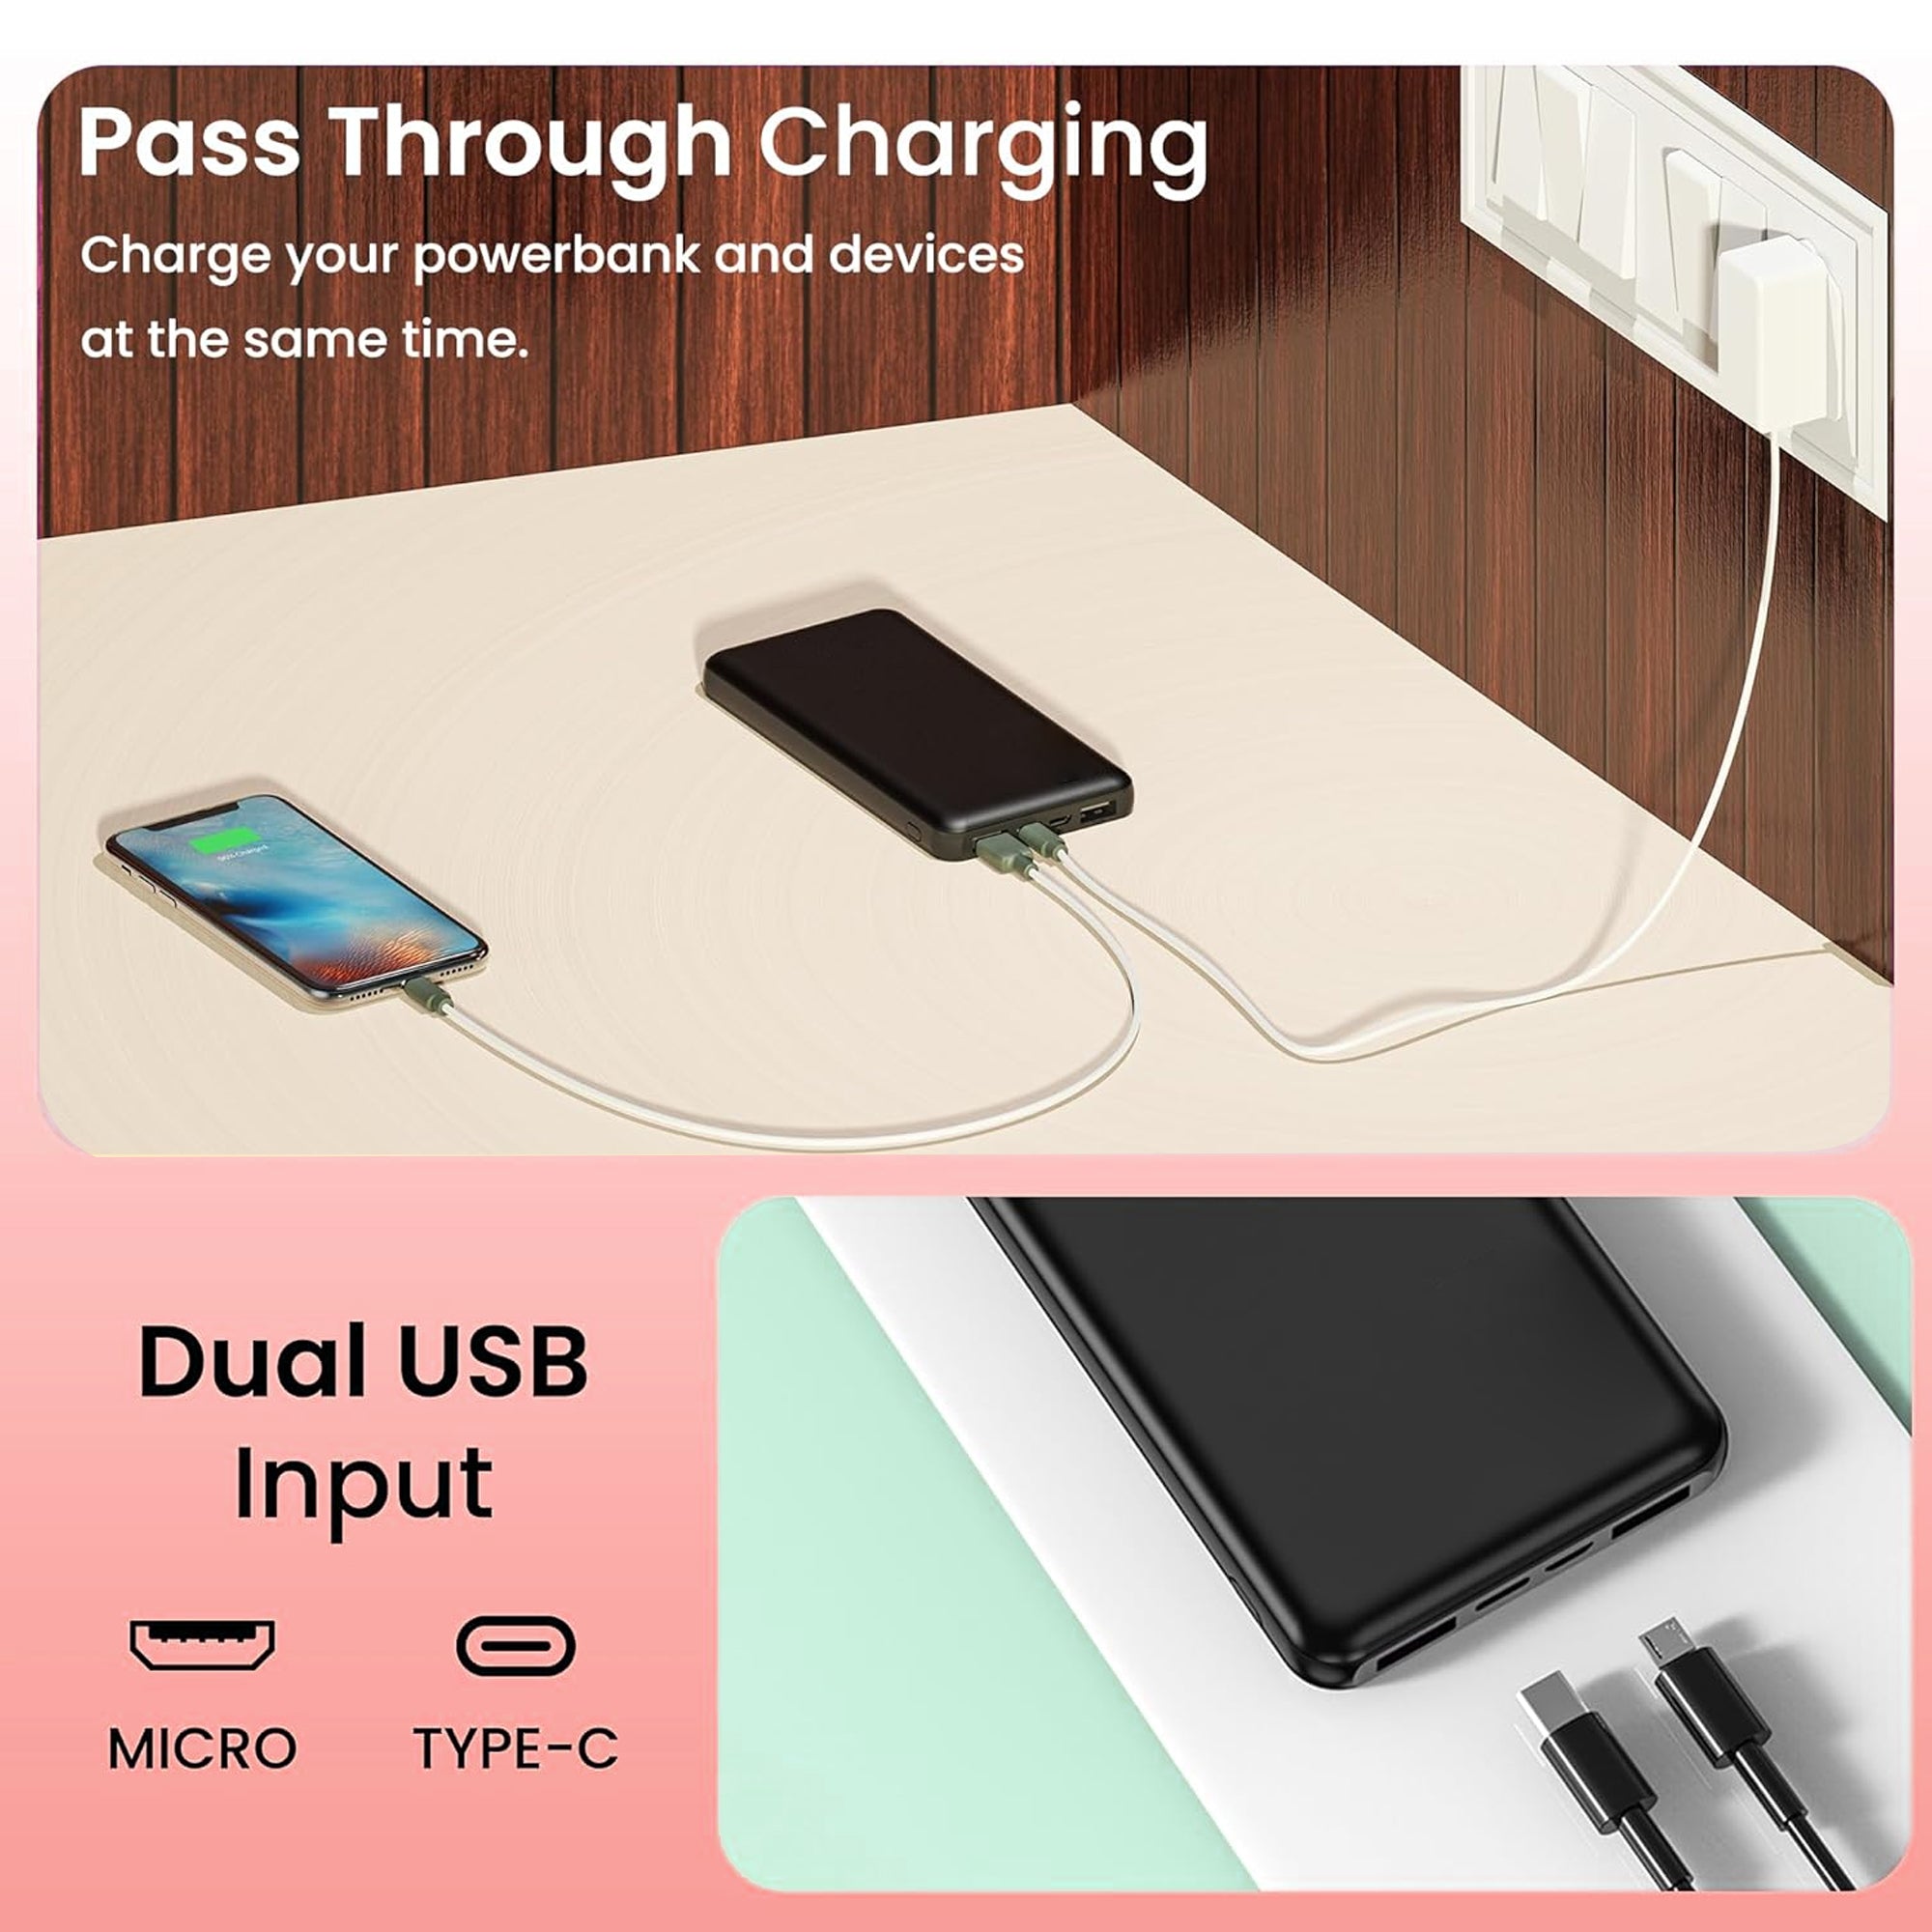 10000mAh Lithium Ion, Lithium Polymer Power Bank Pocket Pro with 22.5 Watt Fast Charging, Dual Input Ports(Micro-USB and Type C), Triple Output Ports, (Black)